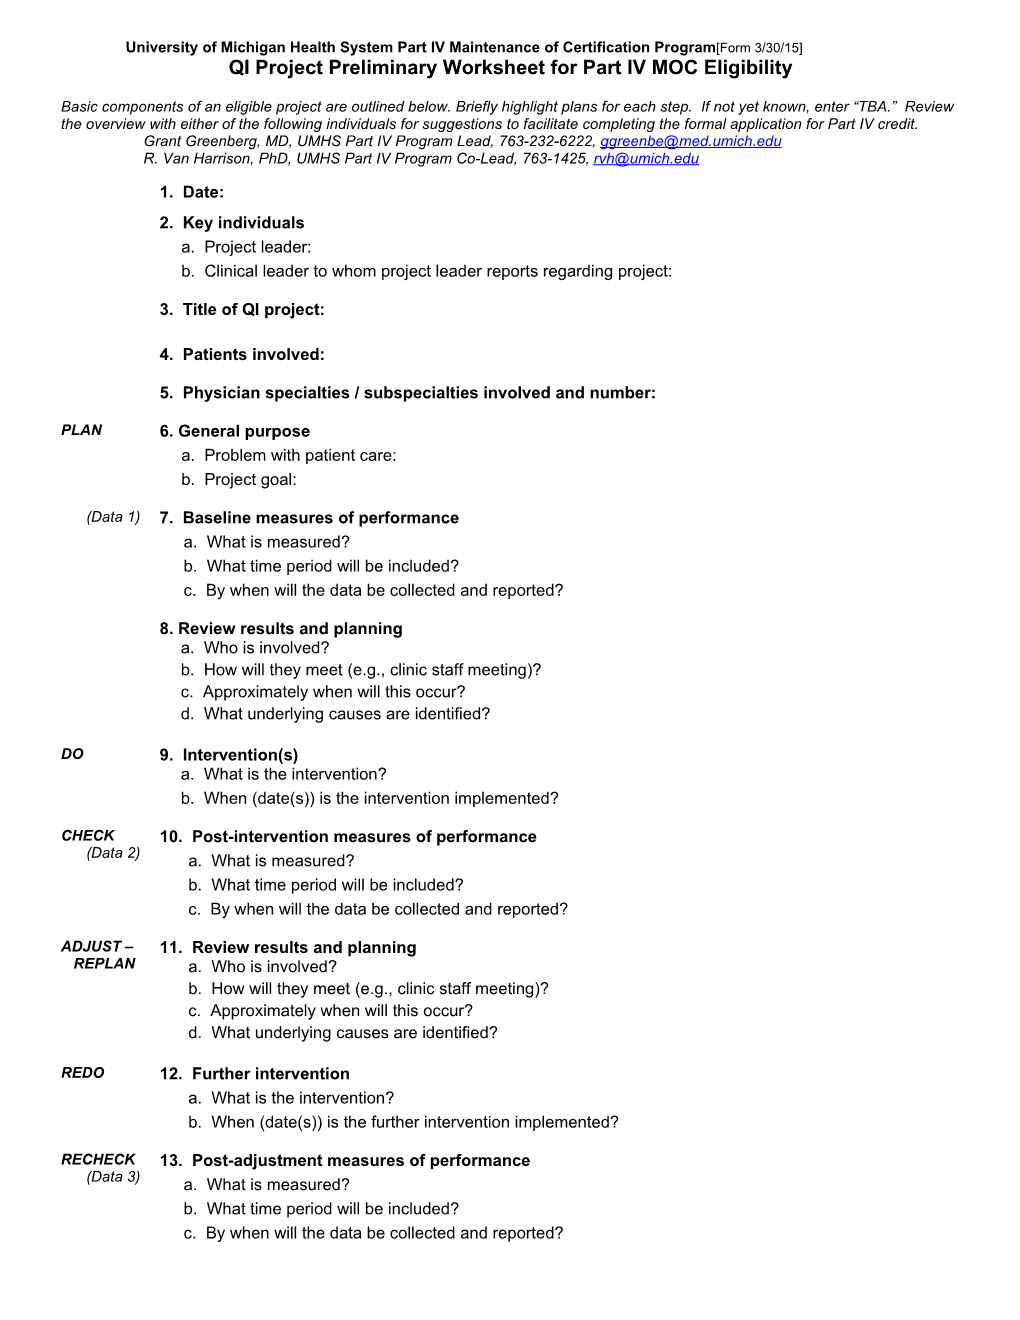 QI Project Preliminary Worksheet for Part IV MOC Eligibility